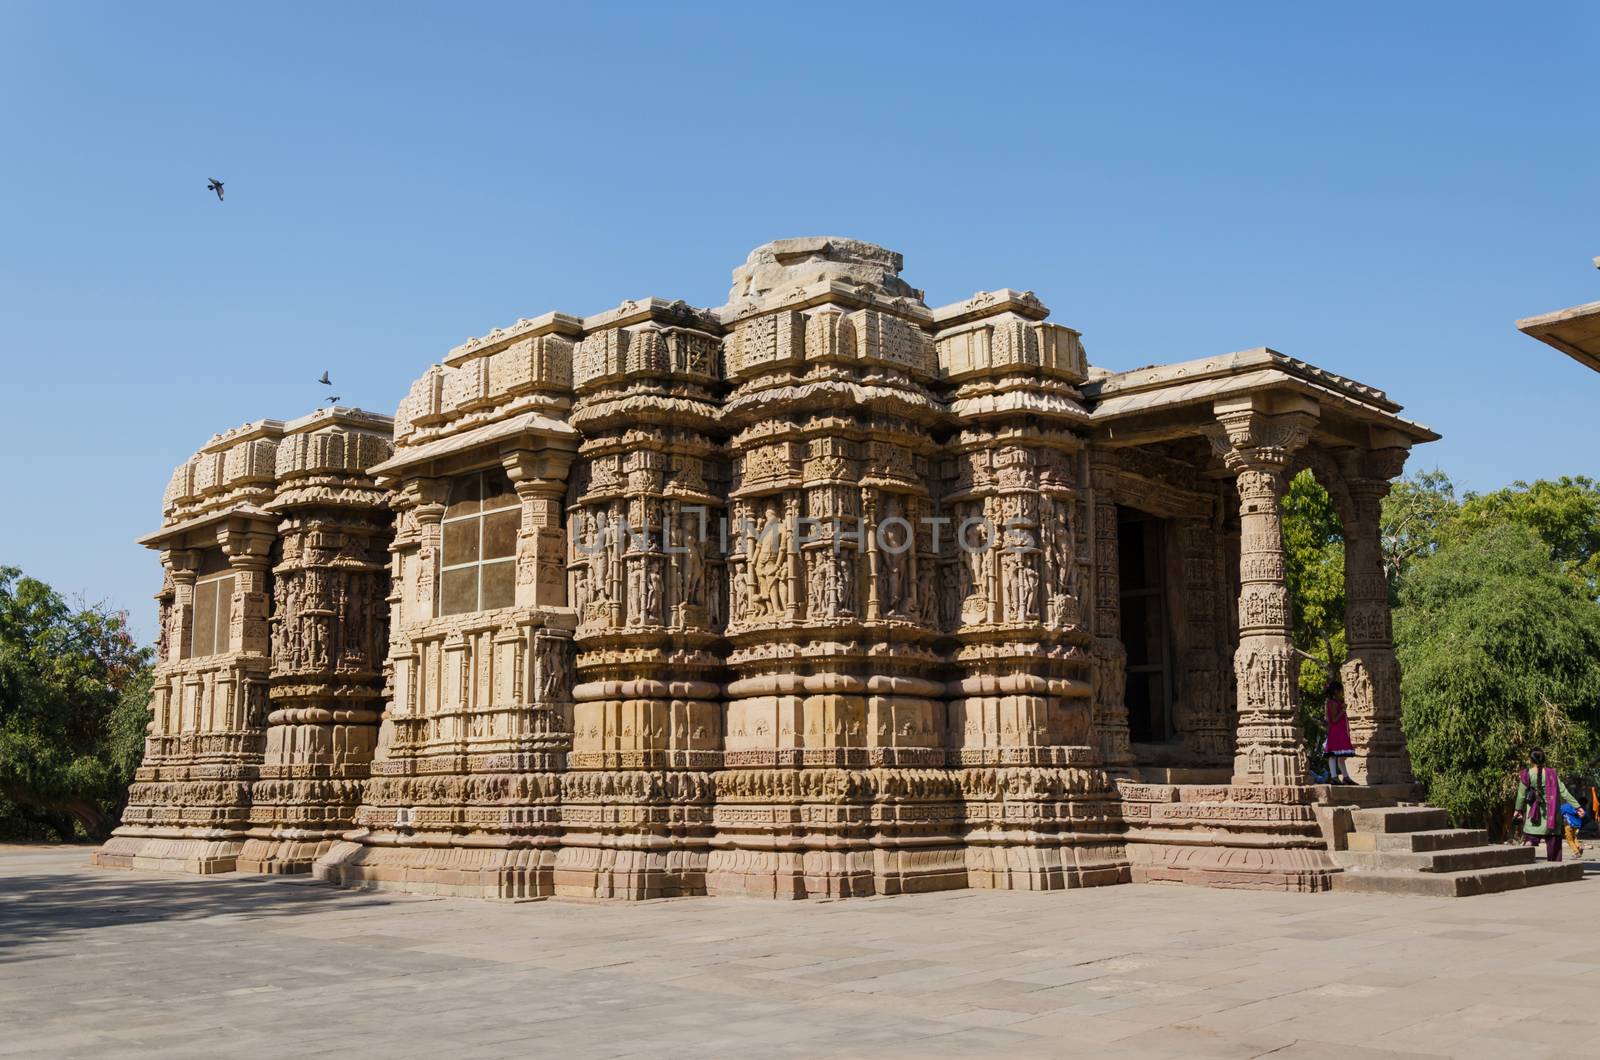 Ahmedabad, India - December 25, 2014: Tourist visit Sun Temple Modhera in Ahmedabad, India on December 25, 2014. It was built in 1026 AD by King Bhimdev of the Solanki dynasty.